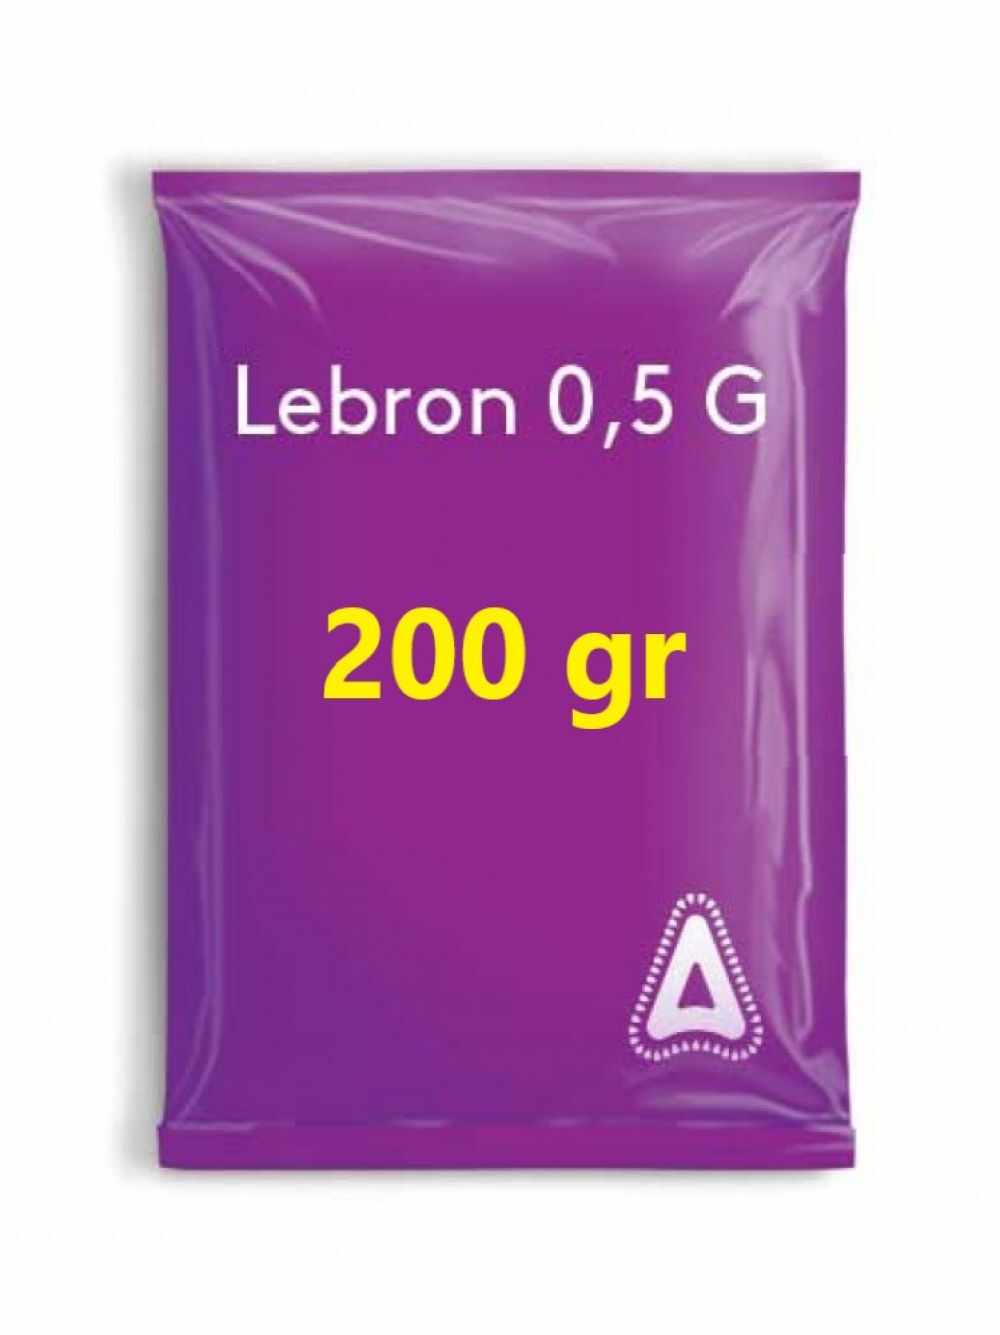 Insecticid Lebron 0.5G 200 gr